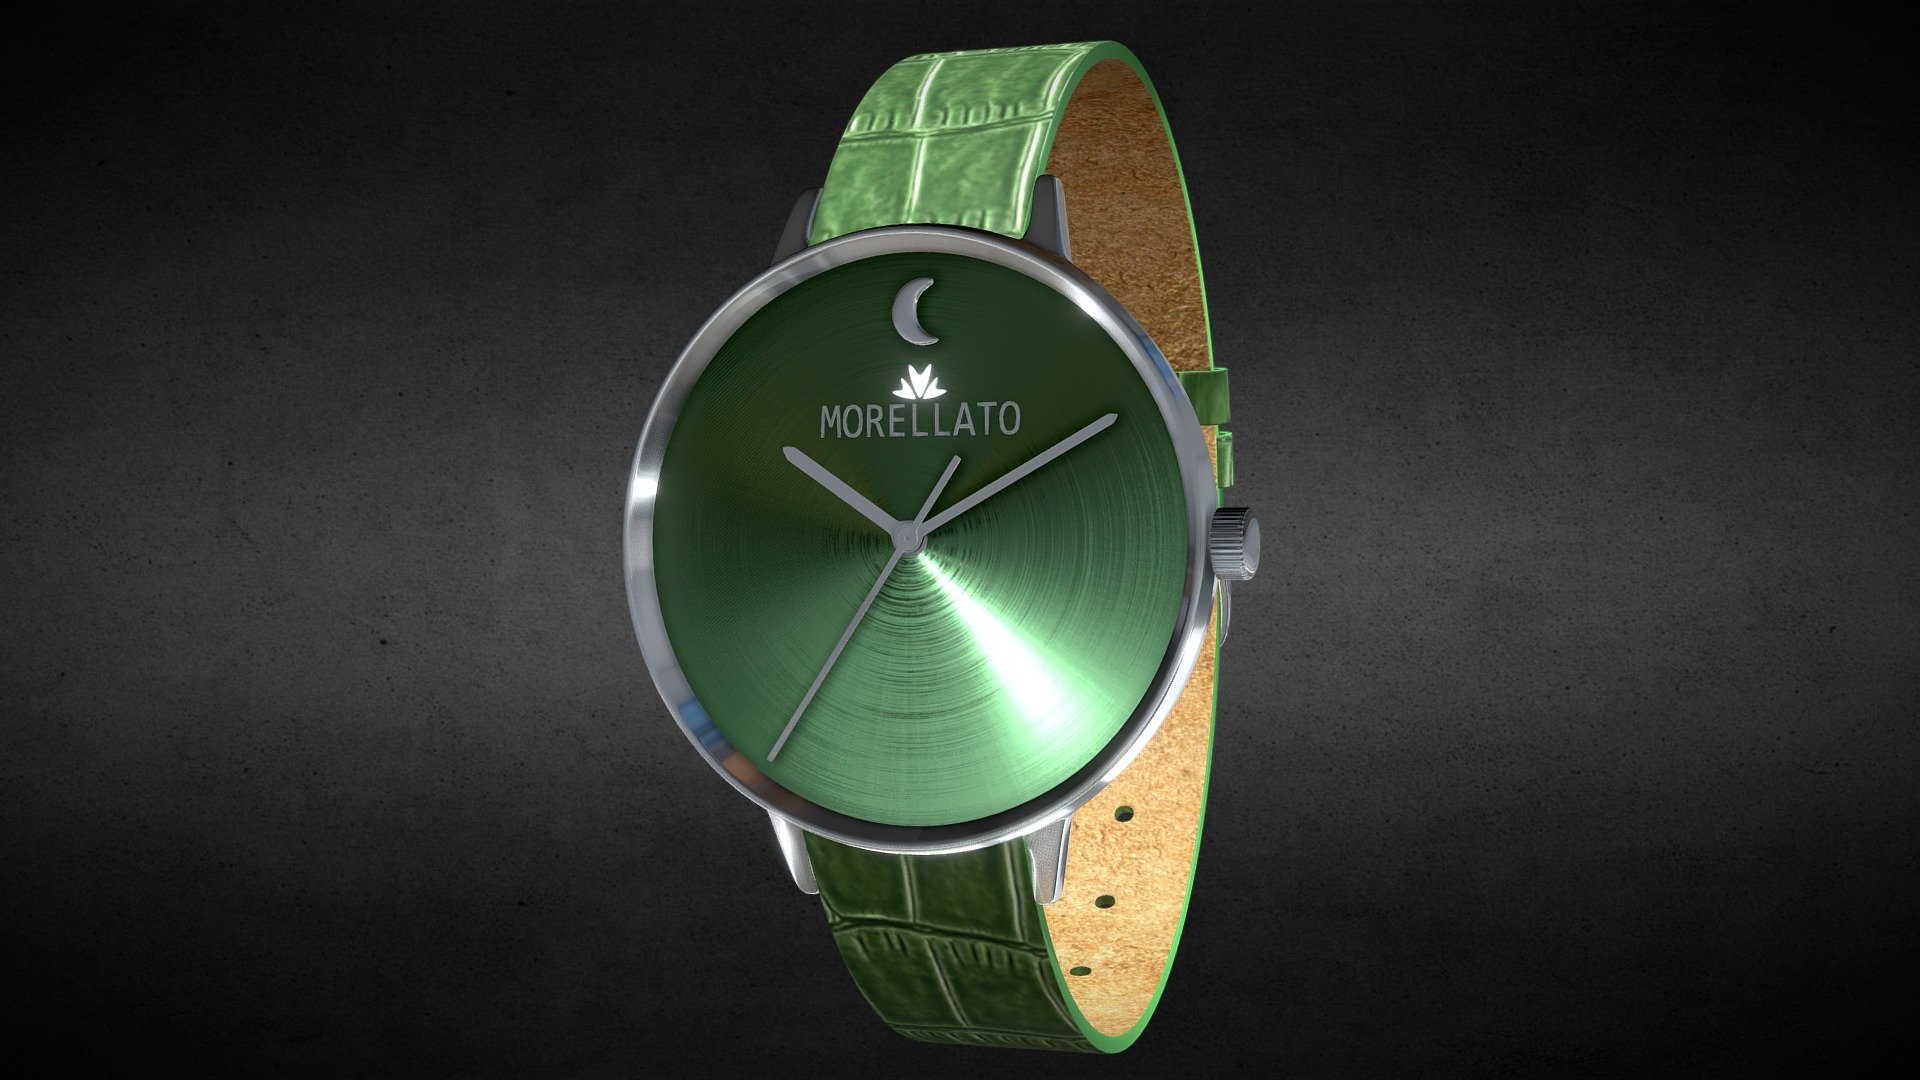 High quality 3D model of Morellato lady's watch. Can be tried on your wrist via Agumented Reality. Try it on the AR-Watches app.
Download app: iOS, Android.

Order similar 3D models by our artists at doscounted prices. Crafted with care and precision.

Zoom in to explore the details and quality 3d model